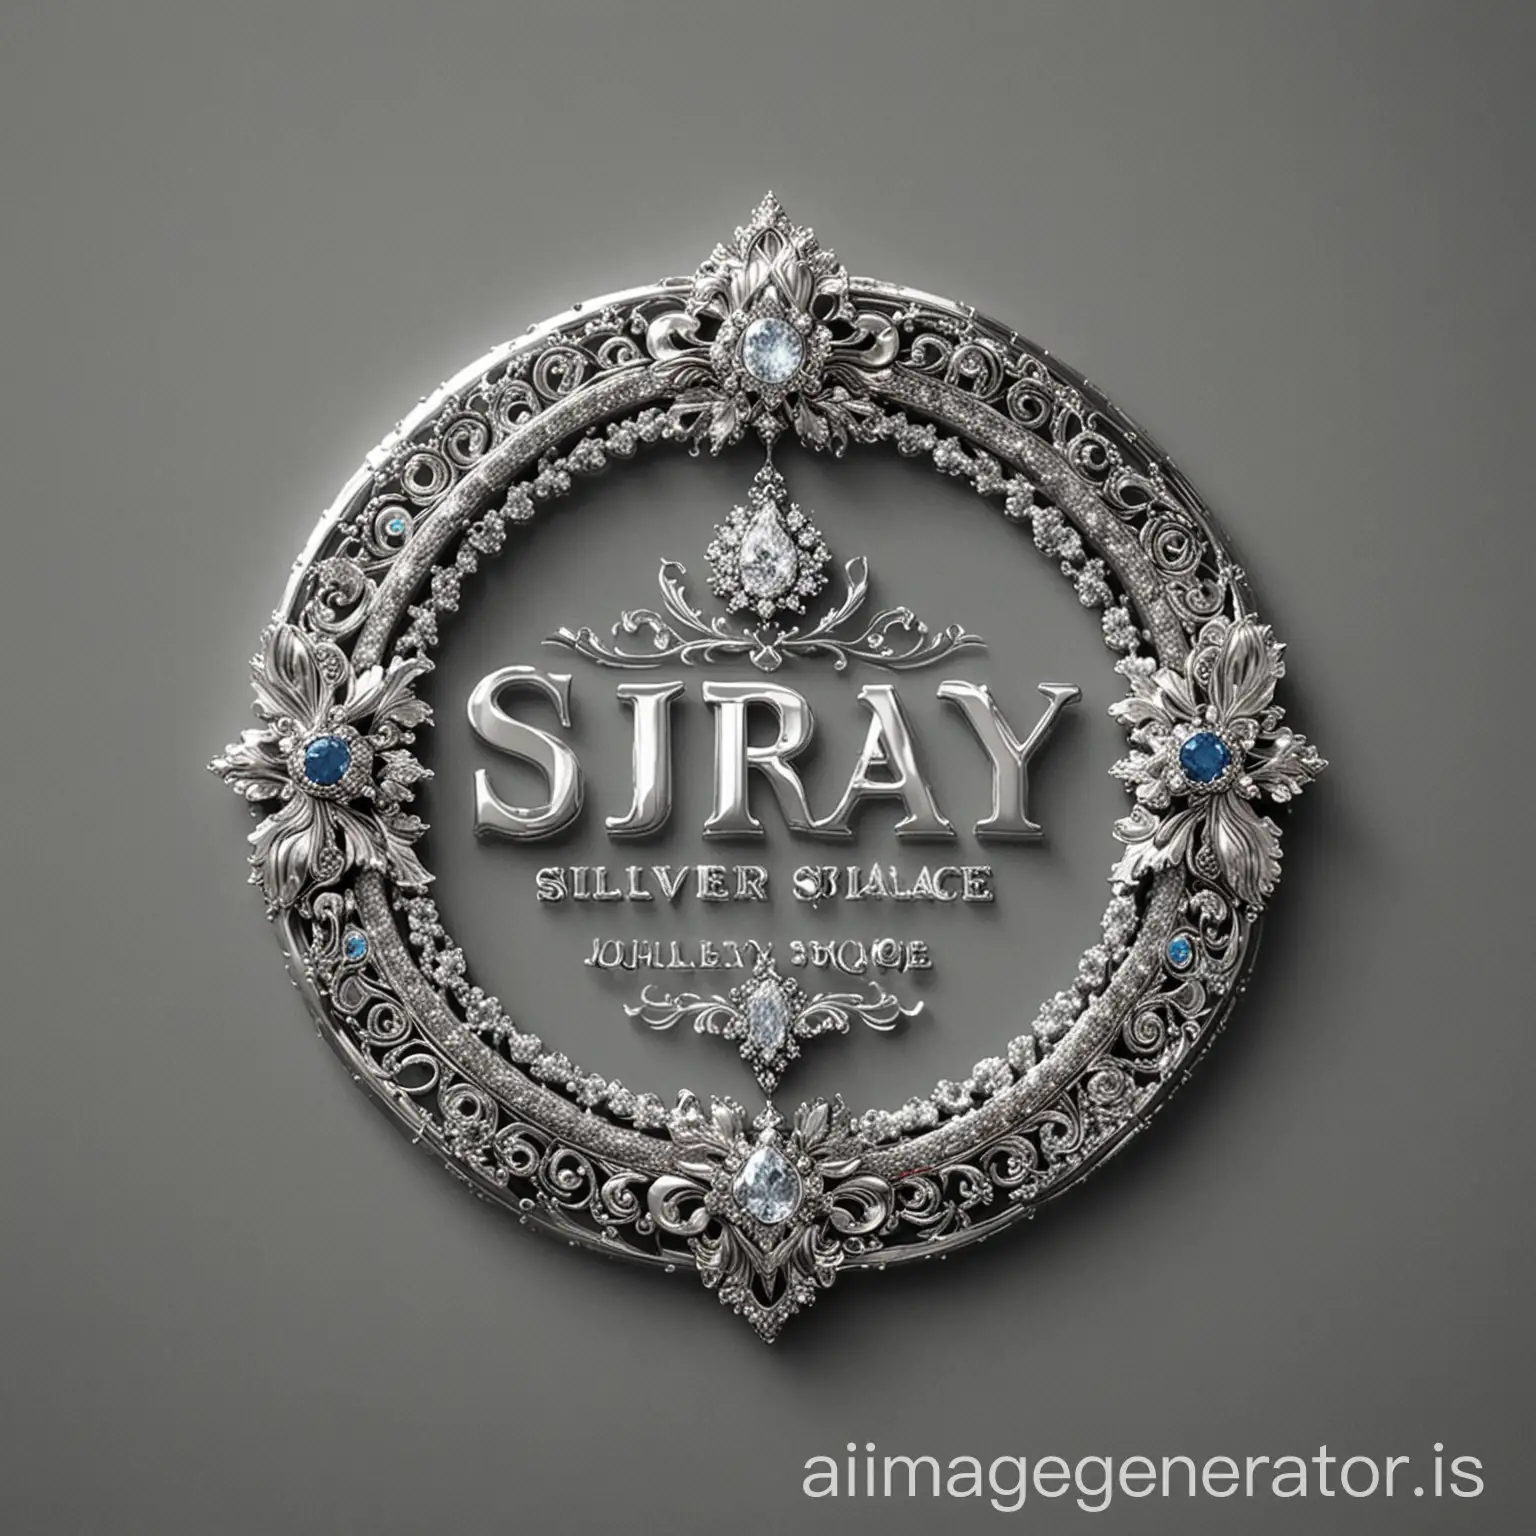 i want you to make me a logo for a silver jewellery shop that im going to open. its name is Surya Silver Palace.